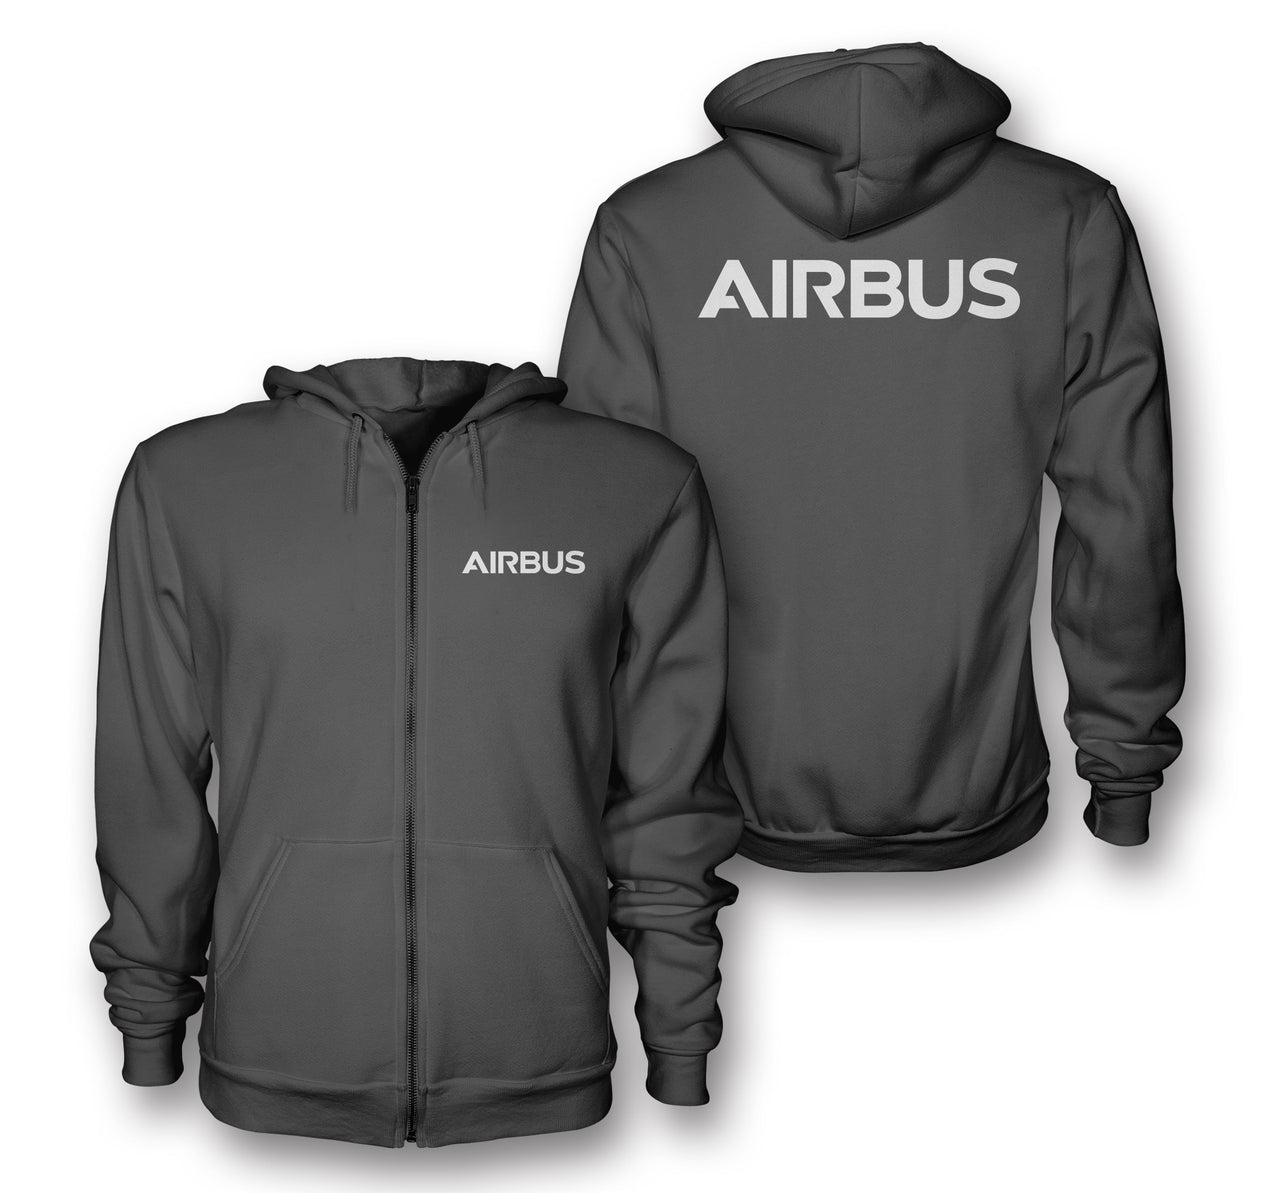 Airbus & Text Designed Zipped Hoodies